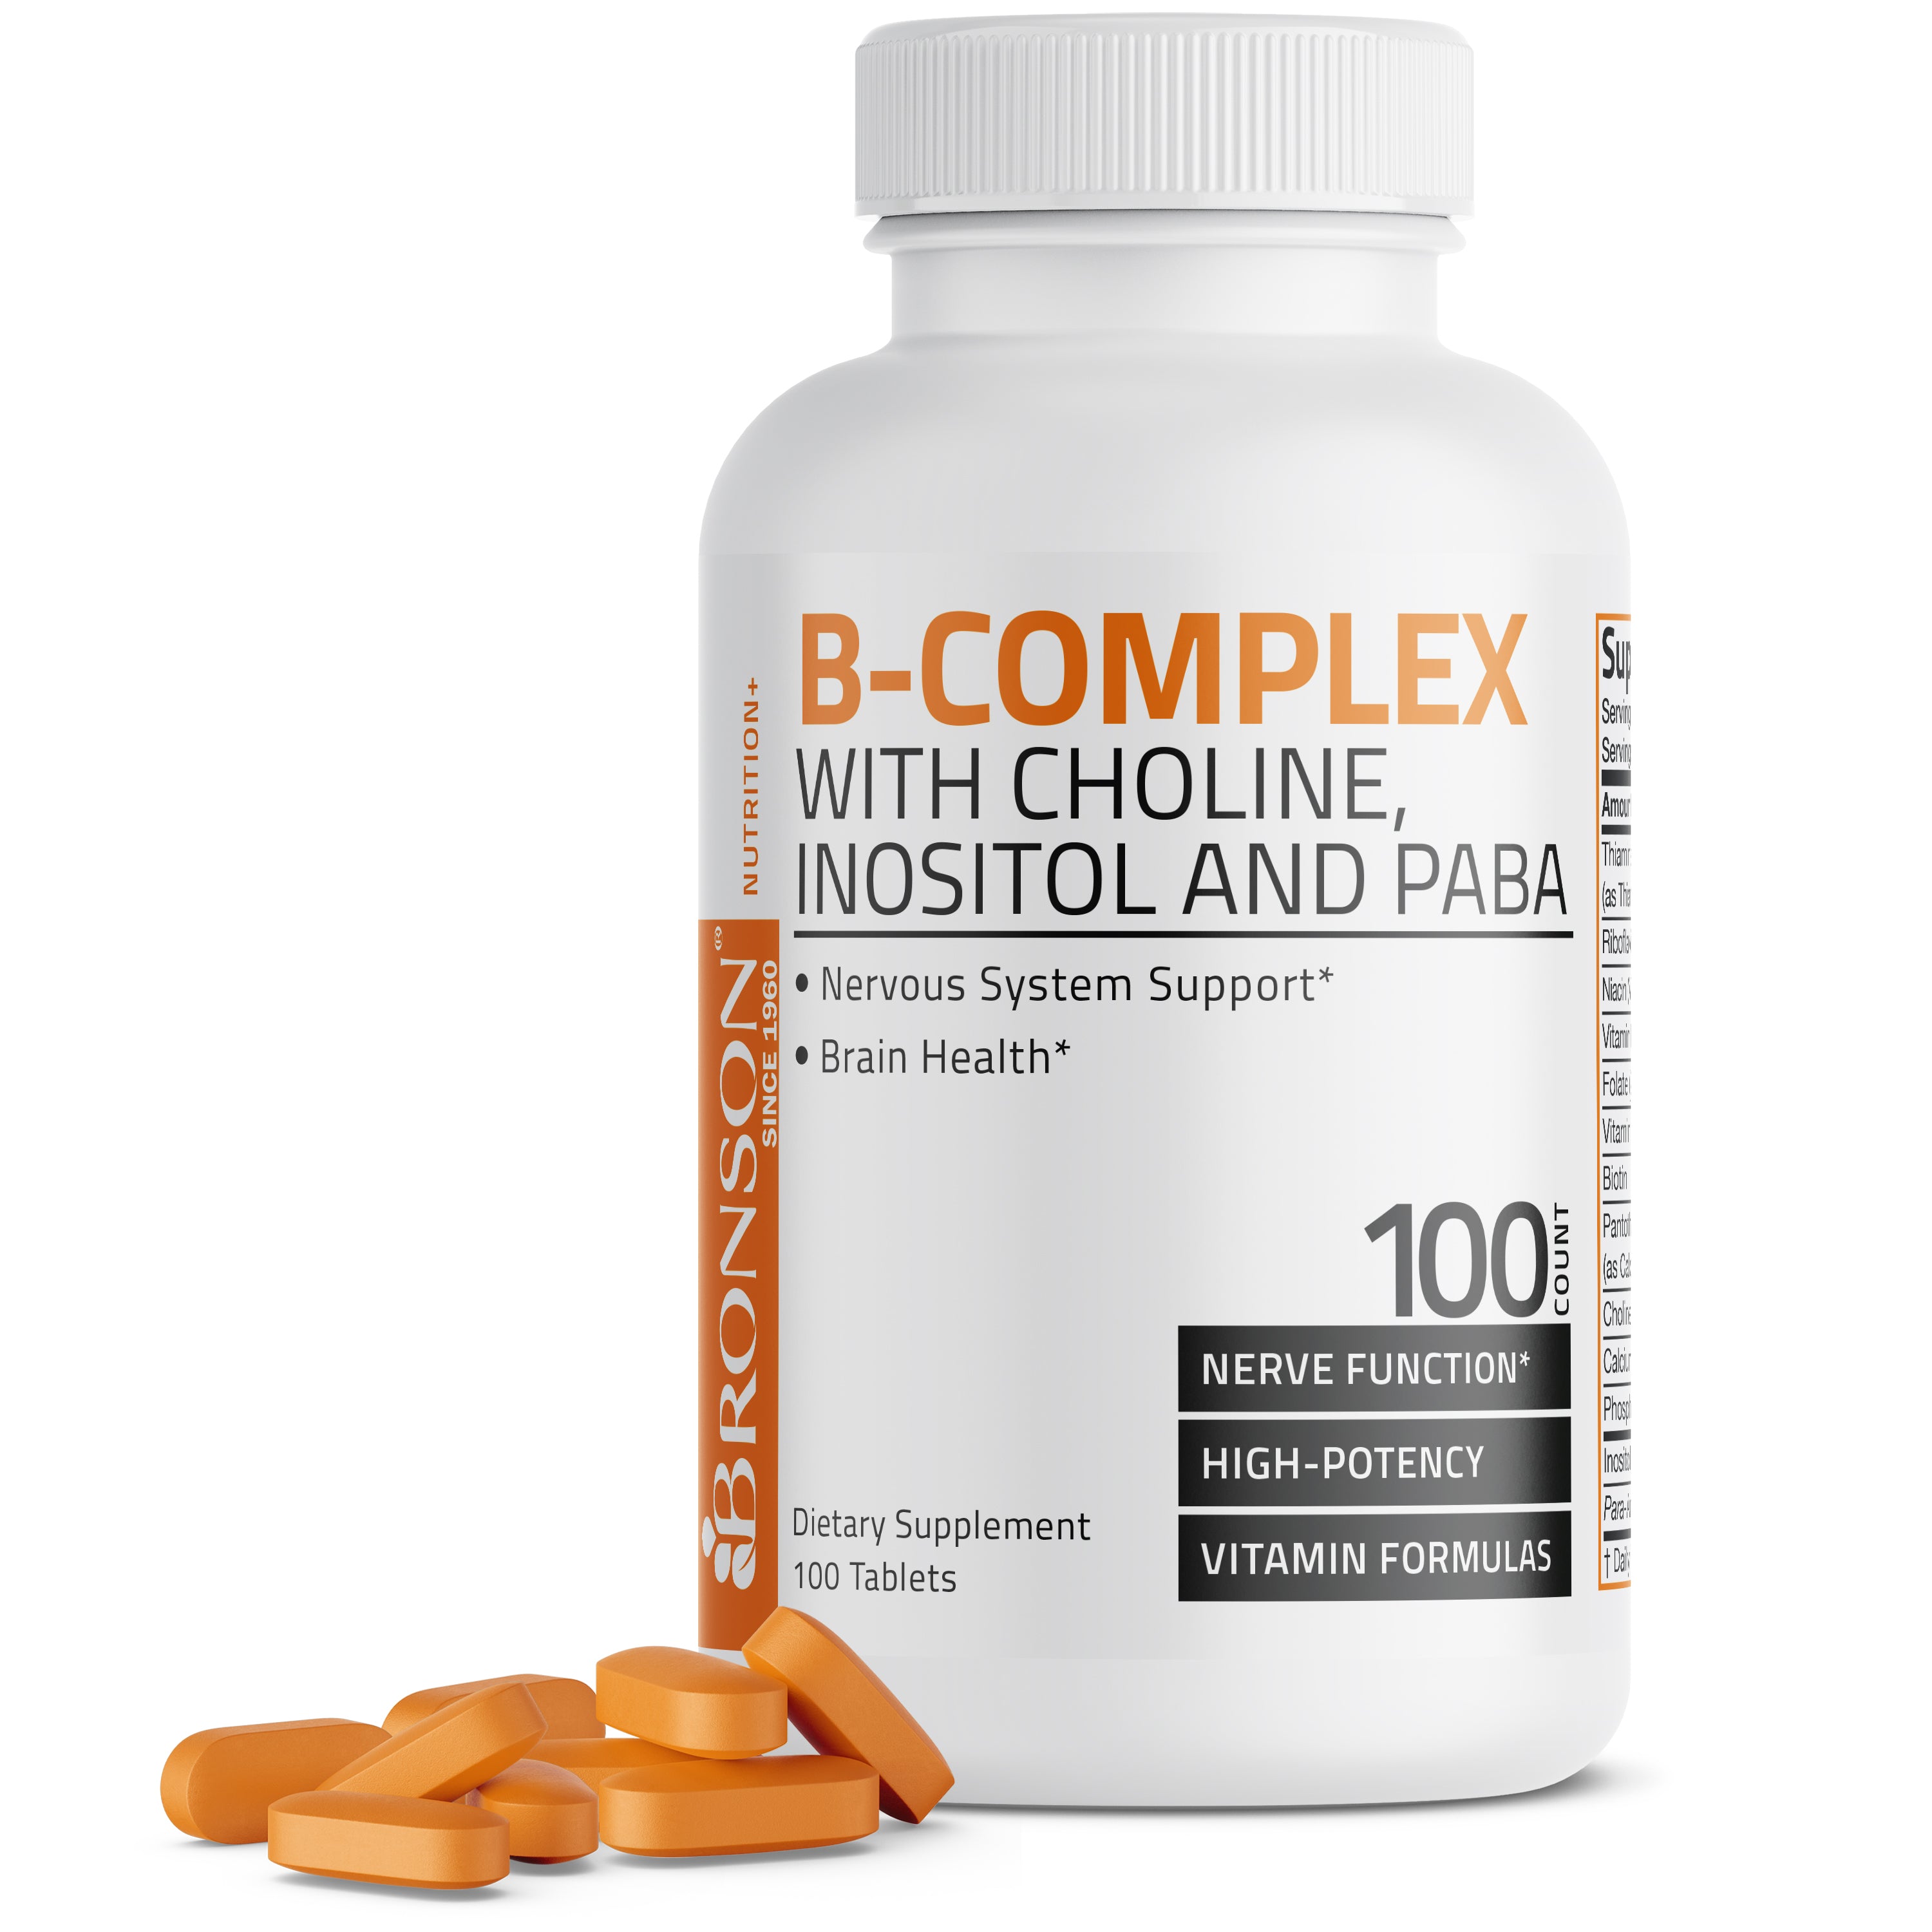 Vitamin B Complex with Choline, Inositol and Paba